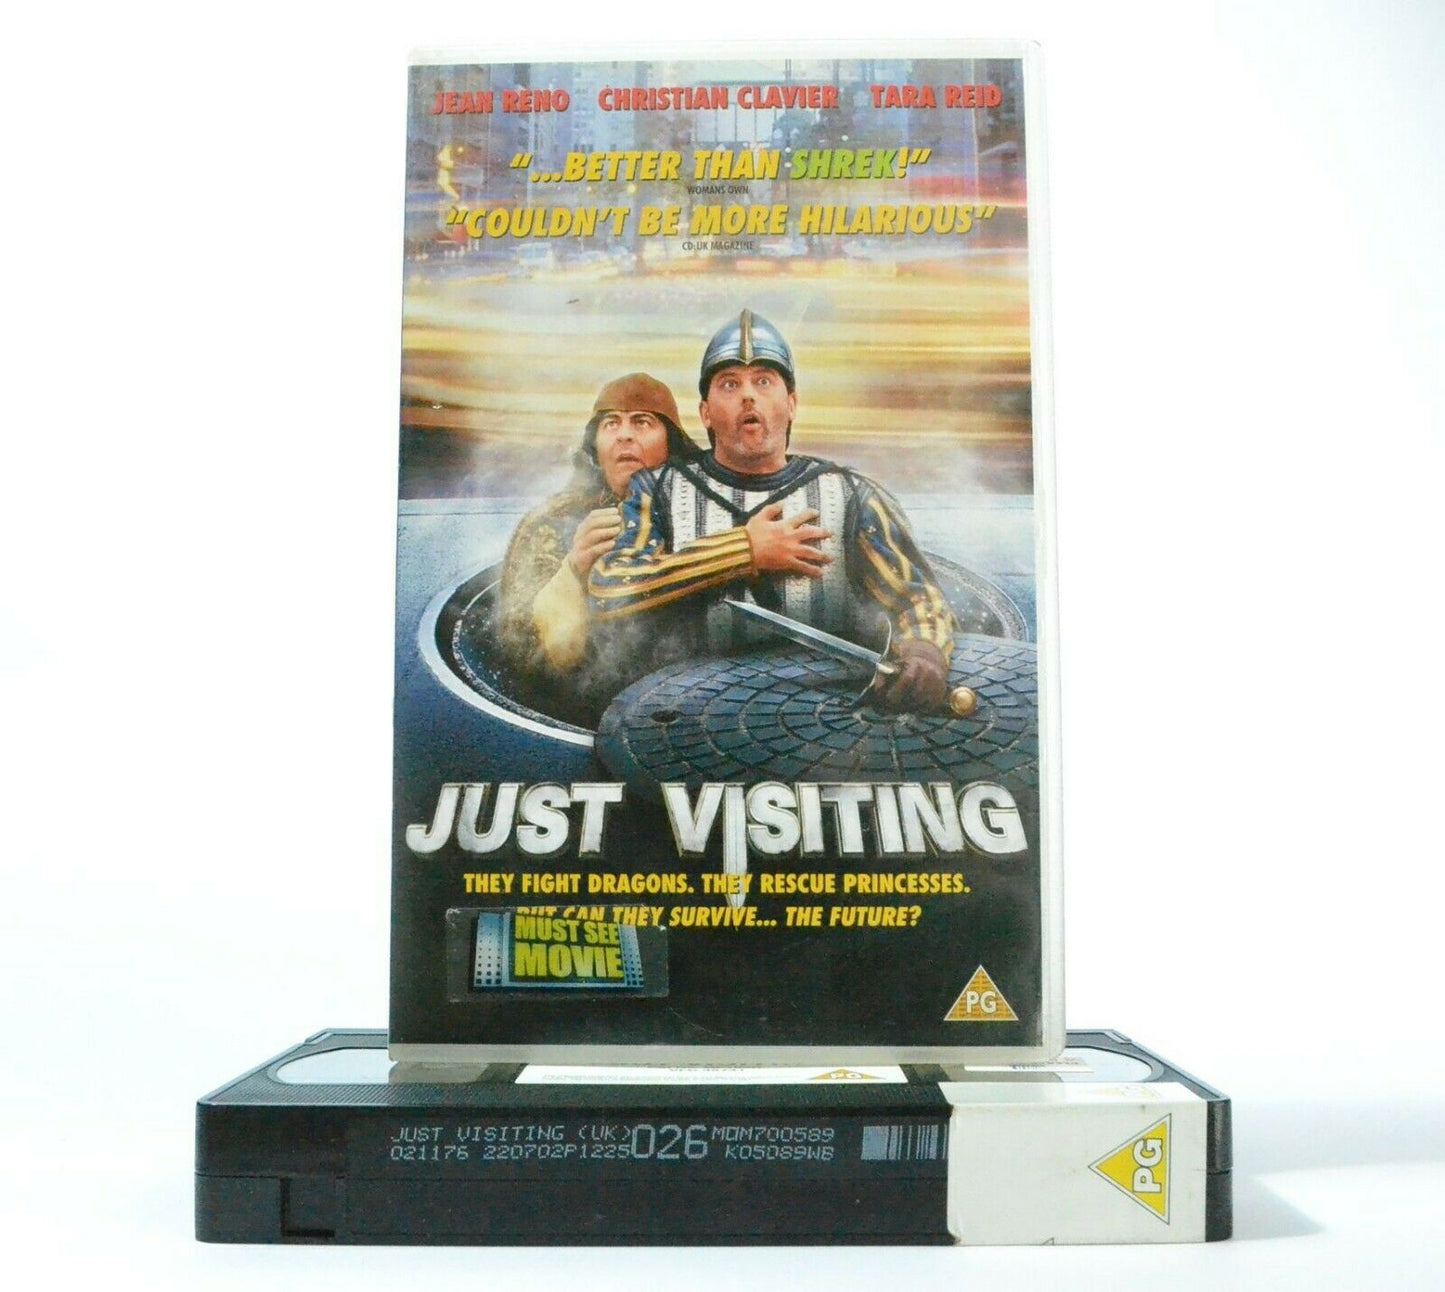 Just Visiting: French/American Comedy - Large Box - J.Reno/C.Applegate - Pal VHS-